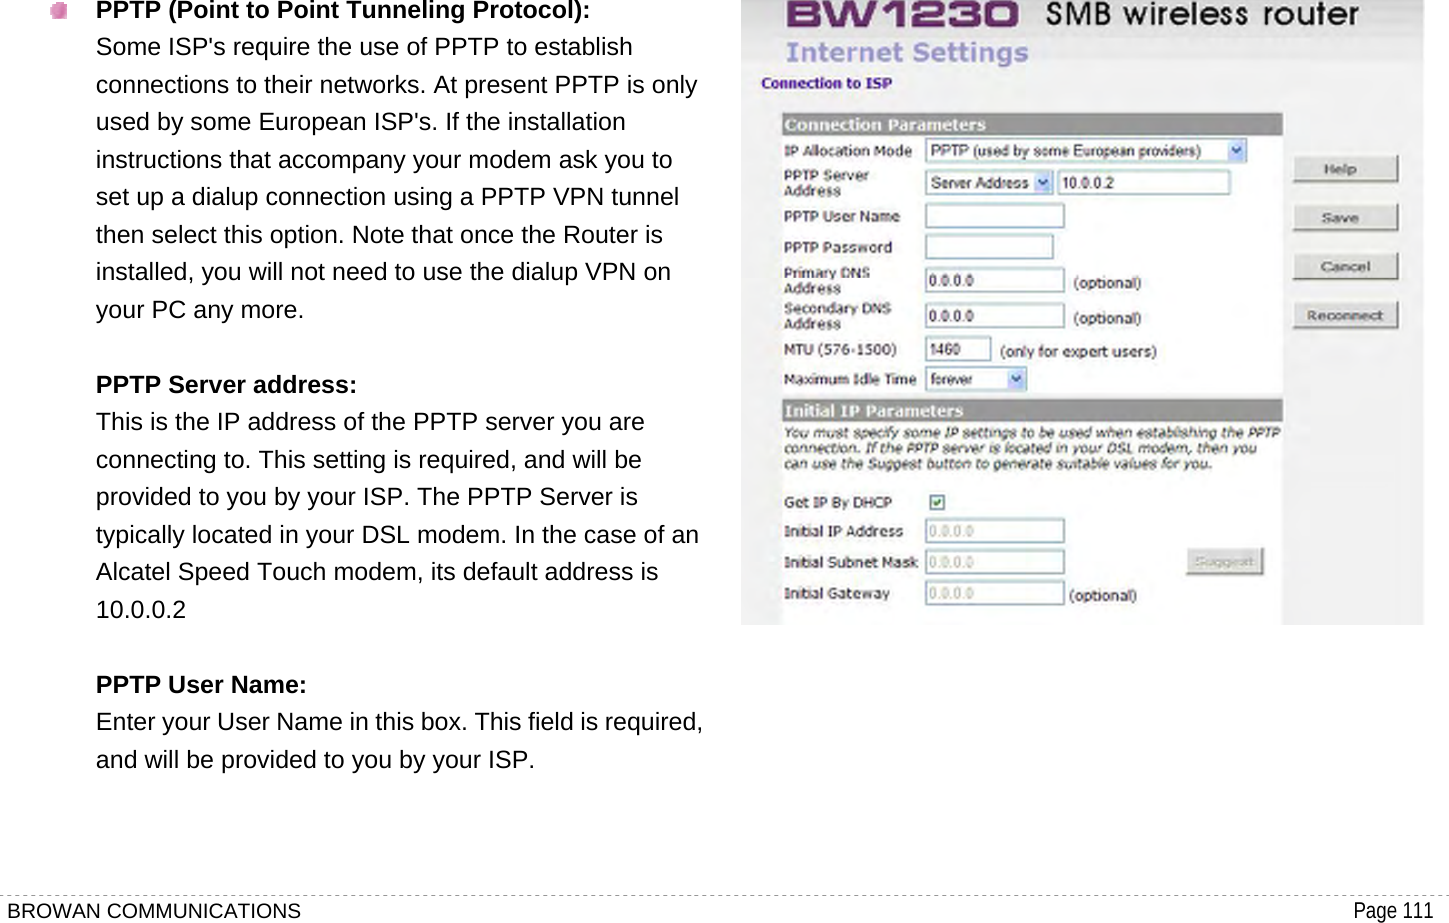 BROWAN COMMUNICATIONS                                                                                           Page 111   PPTP (Point to Point Tunneling Protocol): Some ISP&apos;s require the use of PPTP to establish connections to their networks. At present PPTP is only used by some European ISP&apos;s. If the installation instructions that accompany your modem ask you to set up a dialup connection using a PPTP VPN tunnel then select this option. Note that once the Router is installed, you will not need to use the dialup VPN on your PC any more.  PPTP Server address: This is the IP address of the PPTP server you are connecting to. This setting is required, and will be provided to you by your ISP. The PPTP Server is typically located in your DSL modem. In the case of an Alcatel Speed Touch modem, its default address is 10.0.0.2  PPTP User Name: Enter your User Name in this box. This field is required, and will be provided to you by your ISP.          